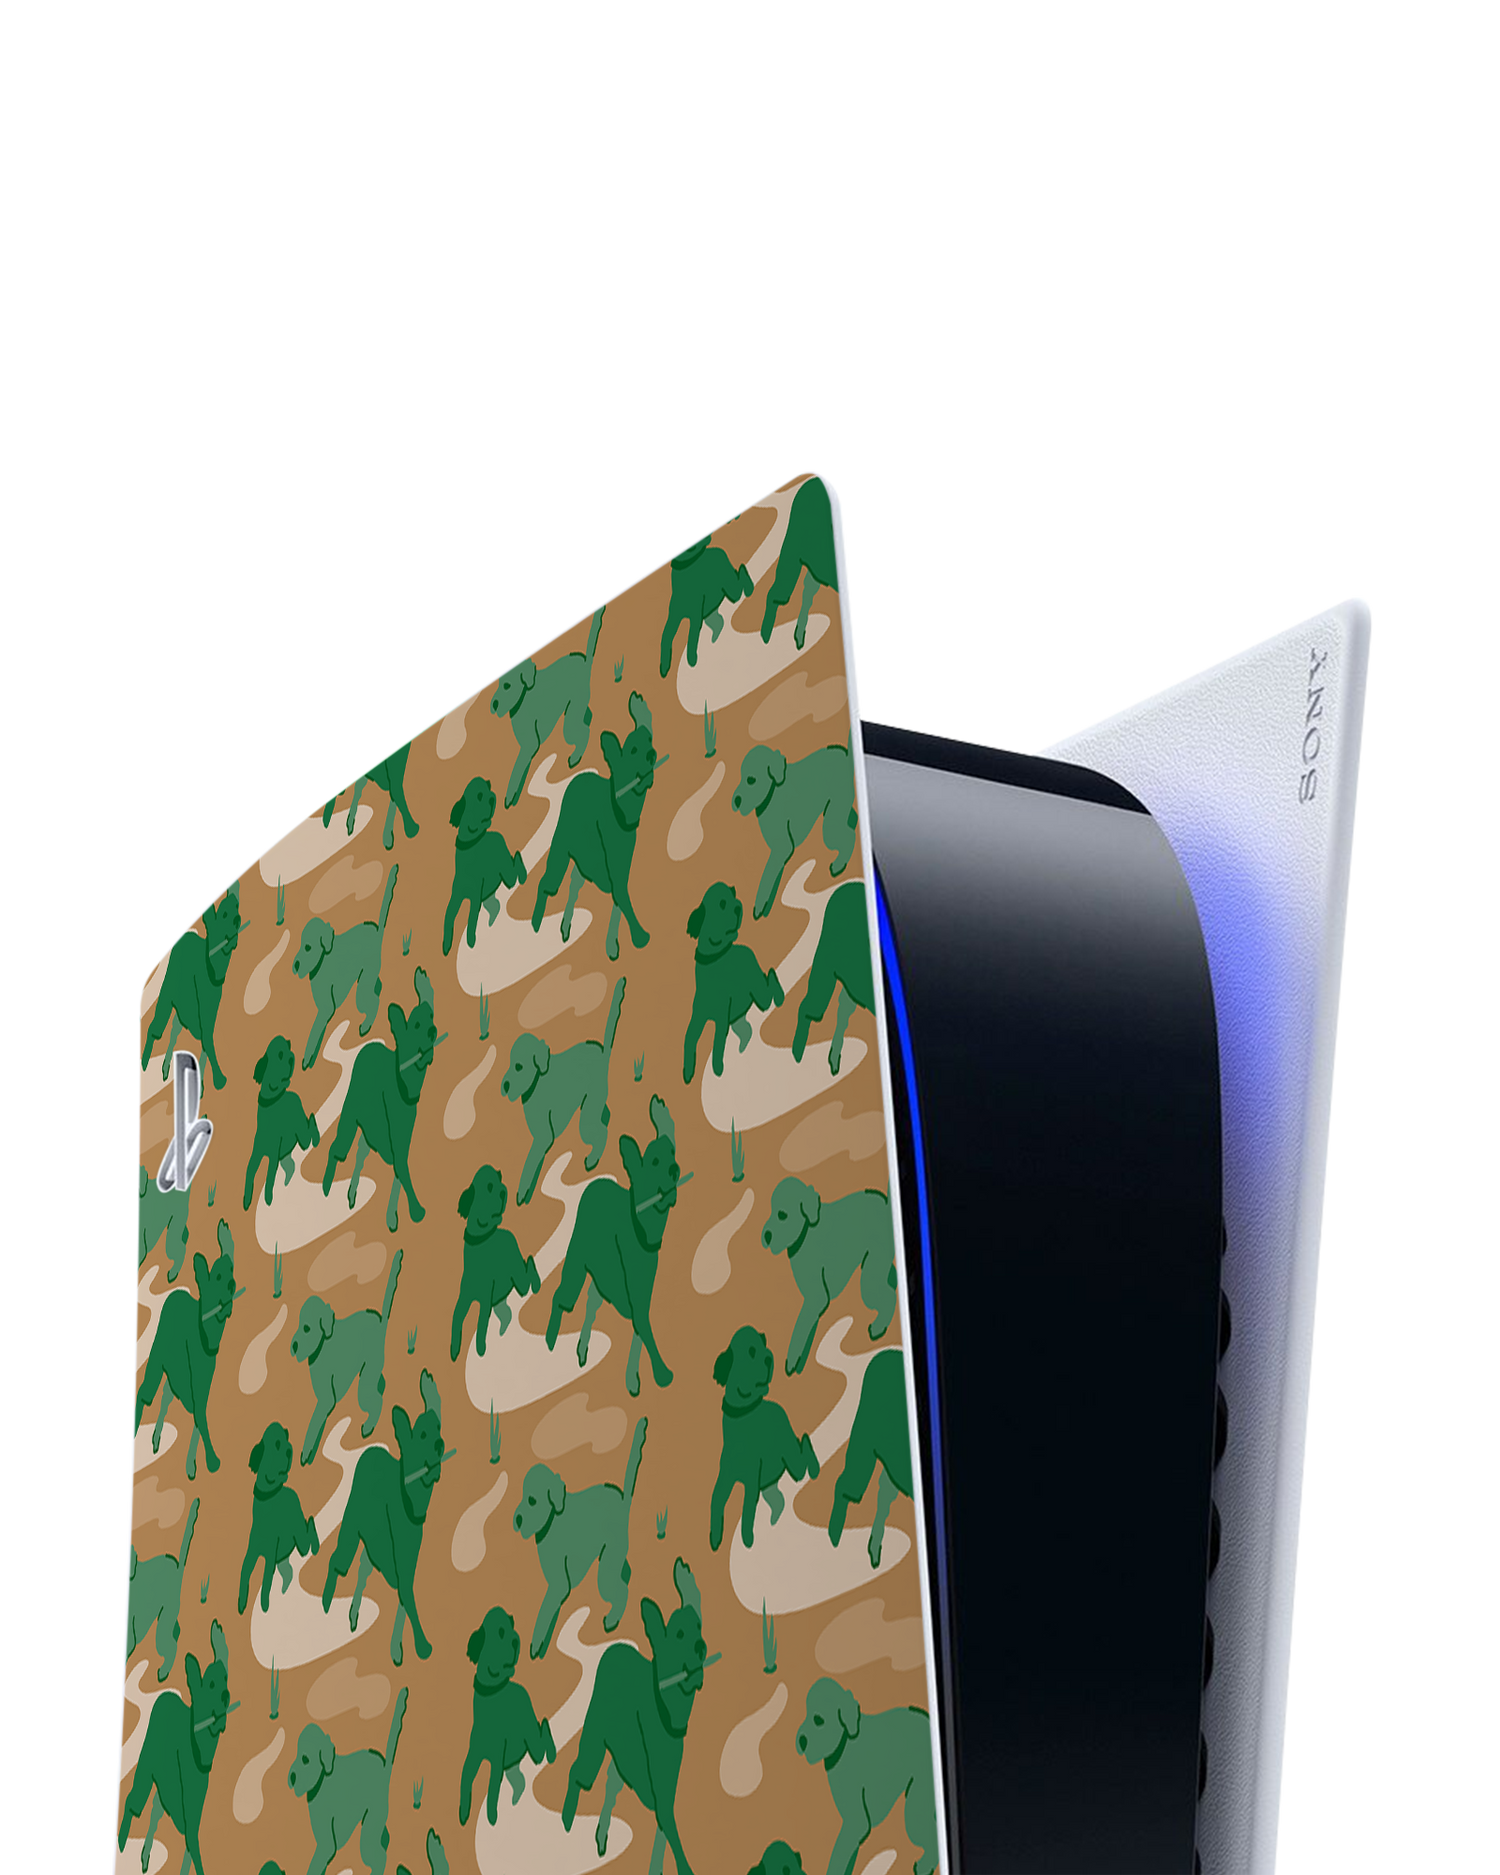 Dog Camo Console Skin for Sony PlayStation 5: Detail shot